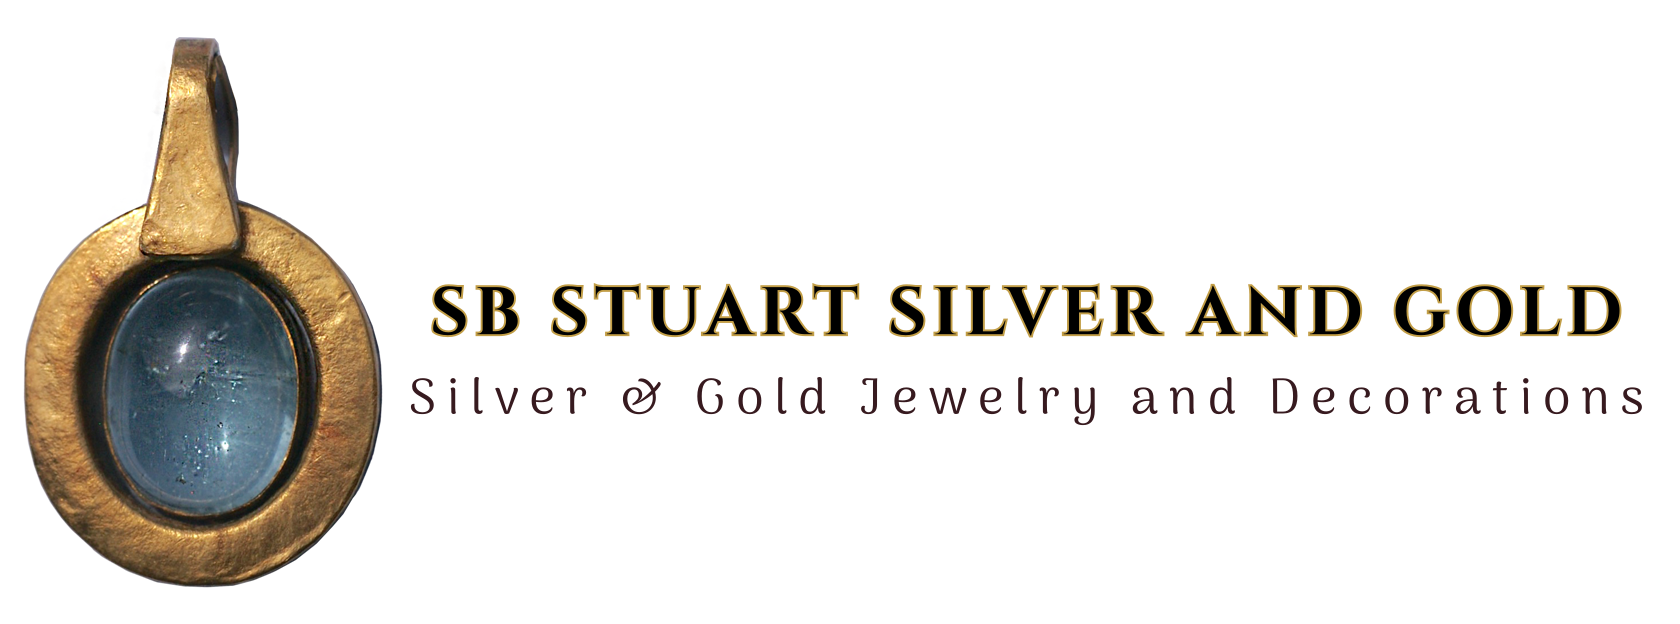 S B STUART SILVER AND GOLD